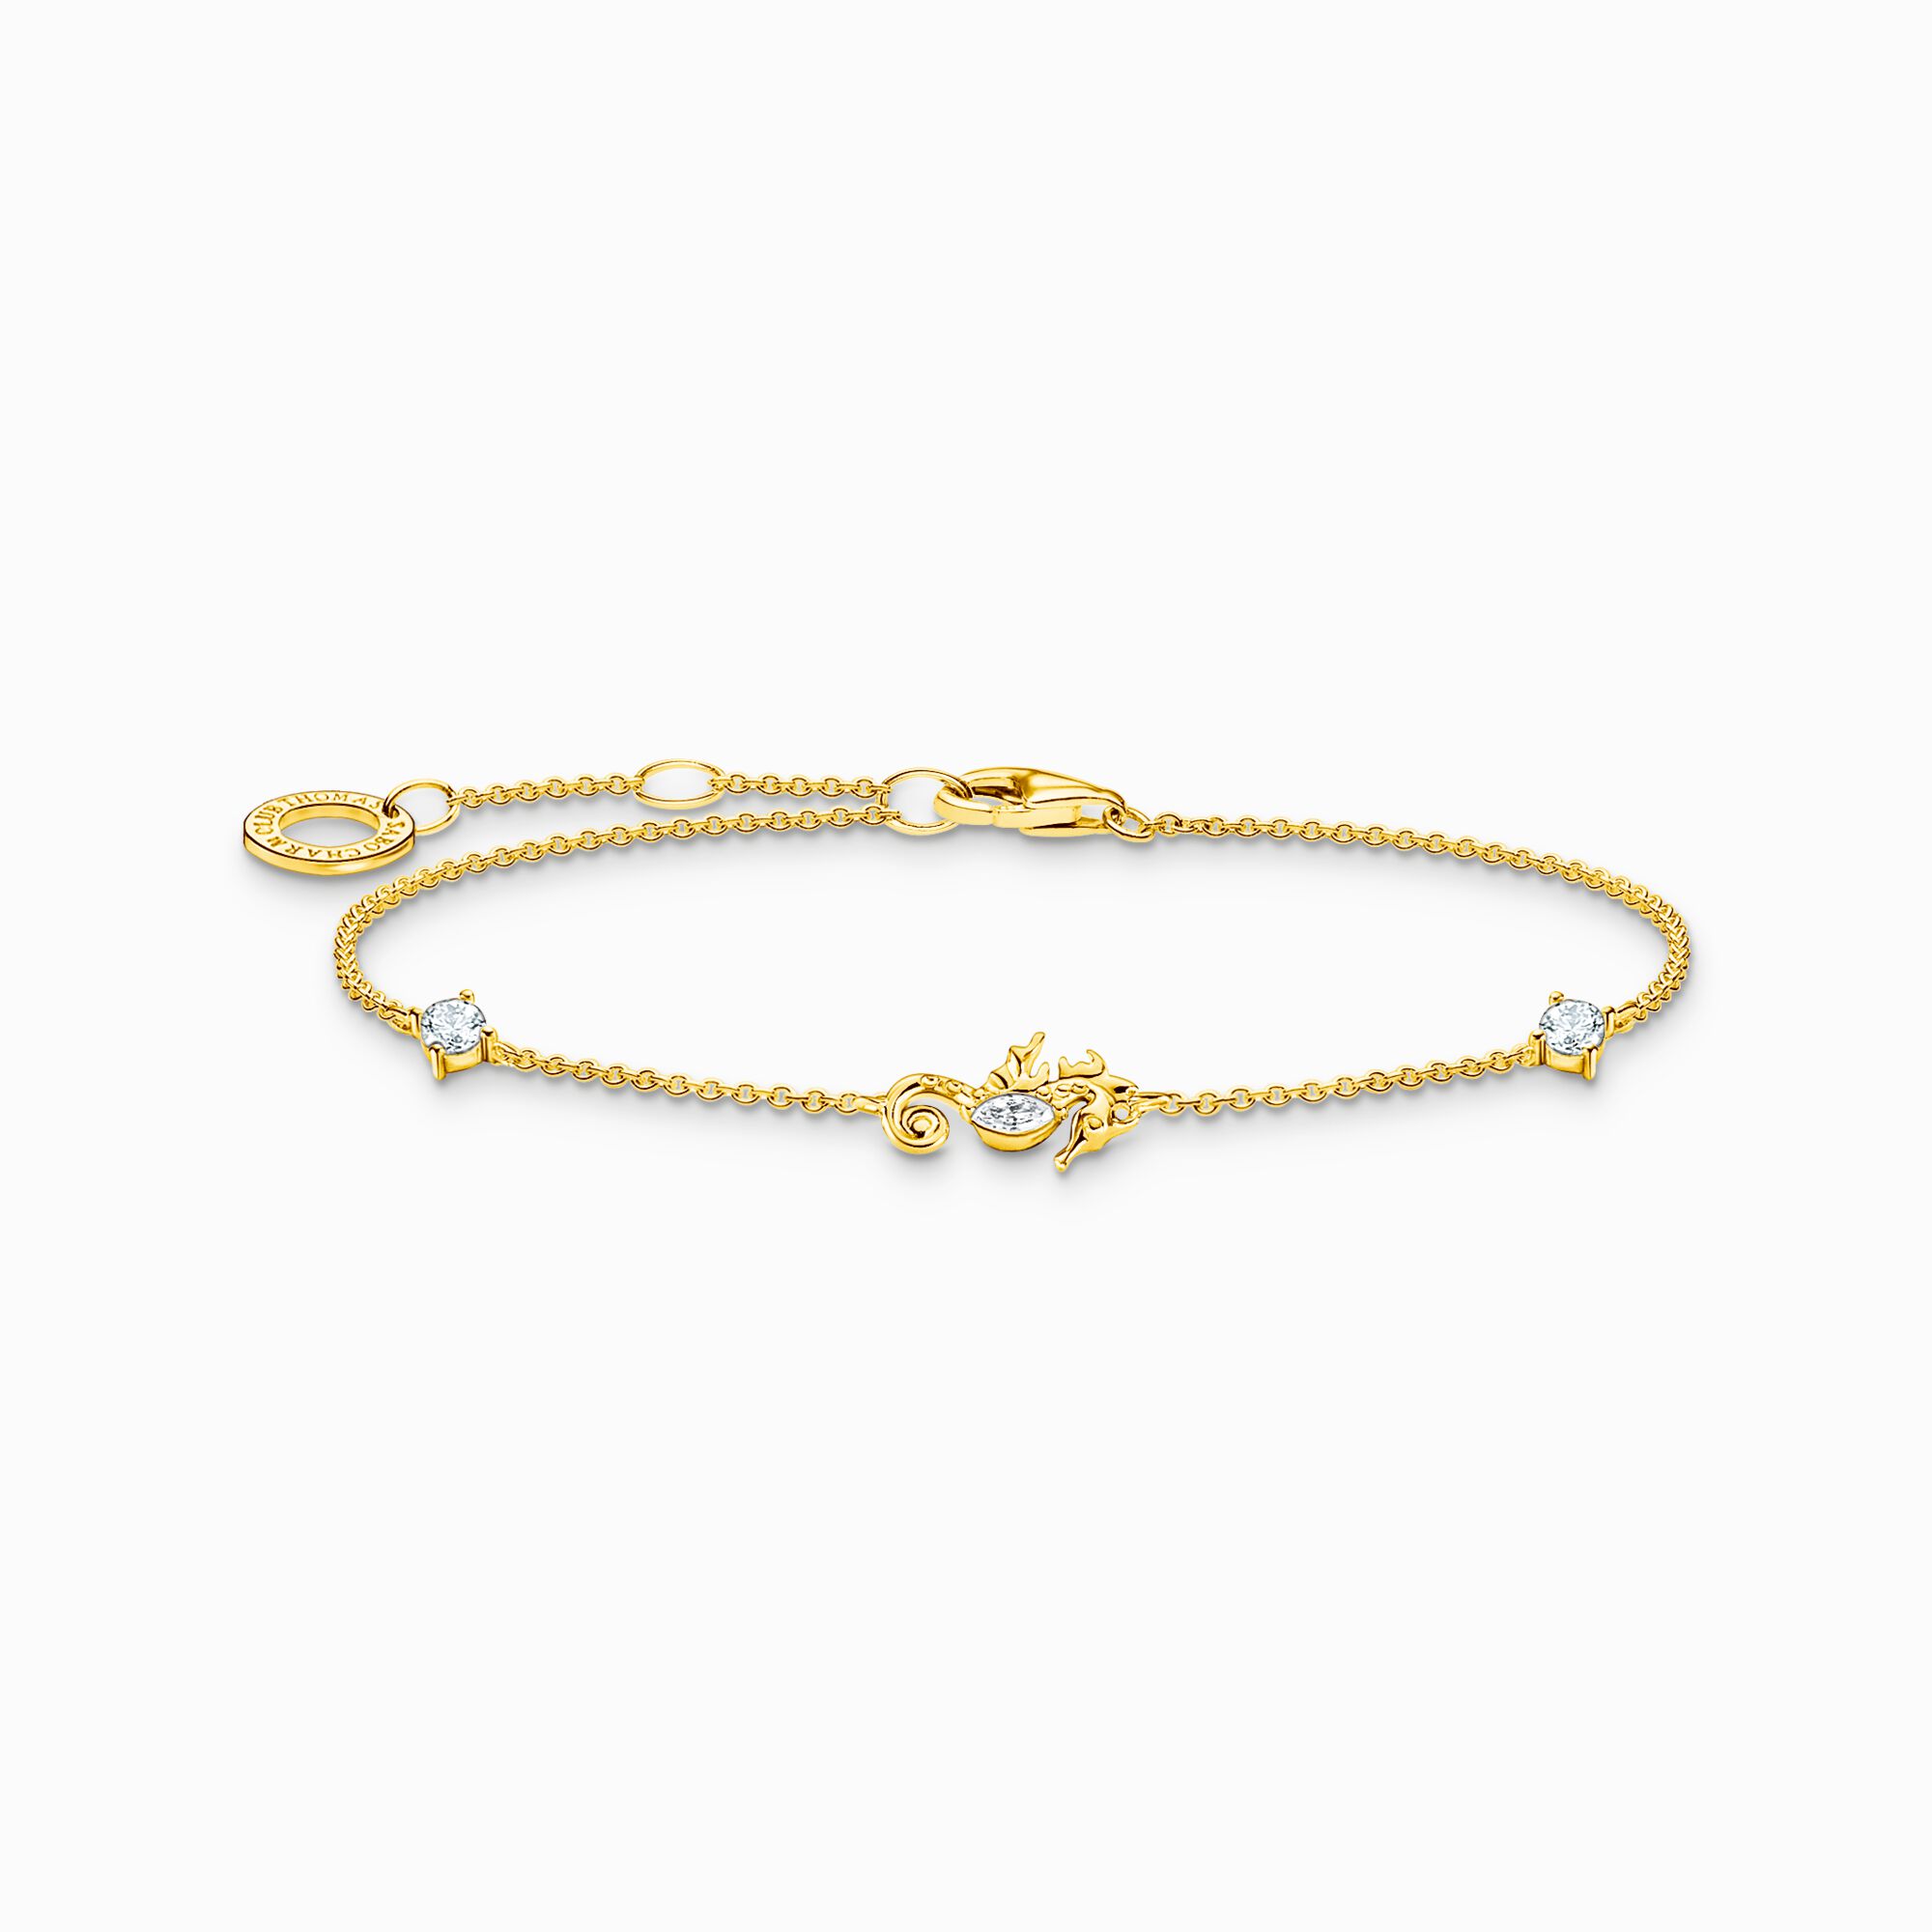 Bracelet seahorse gold from the Charming Collection collection in the THOMAS SABO online store